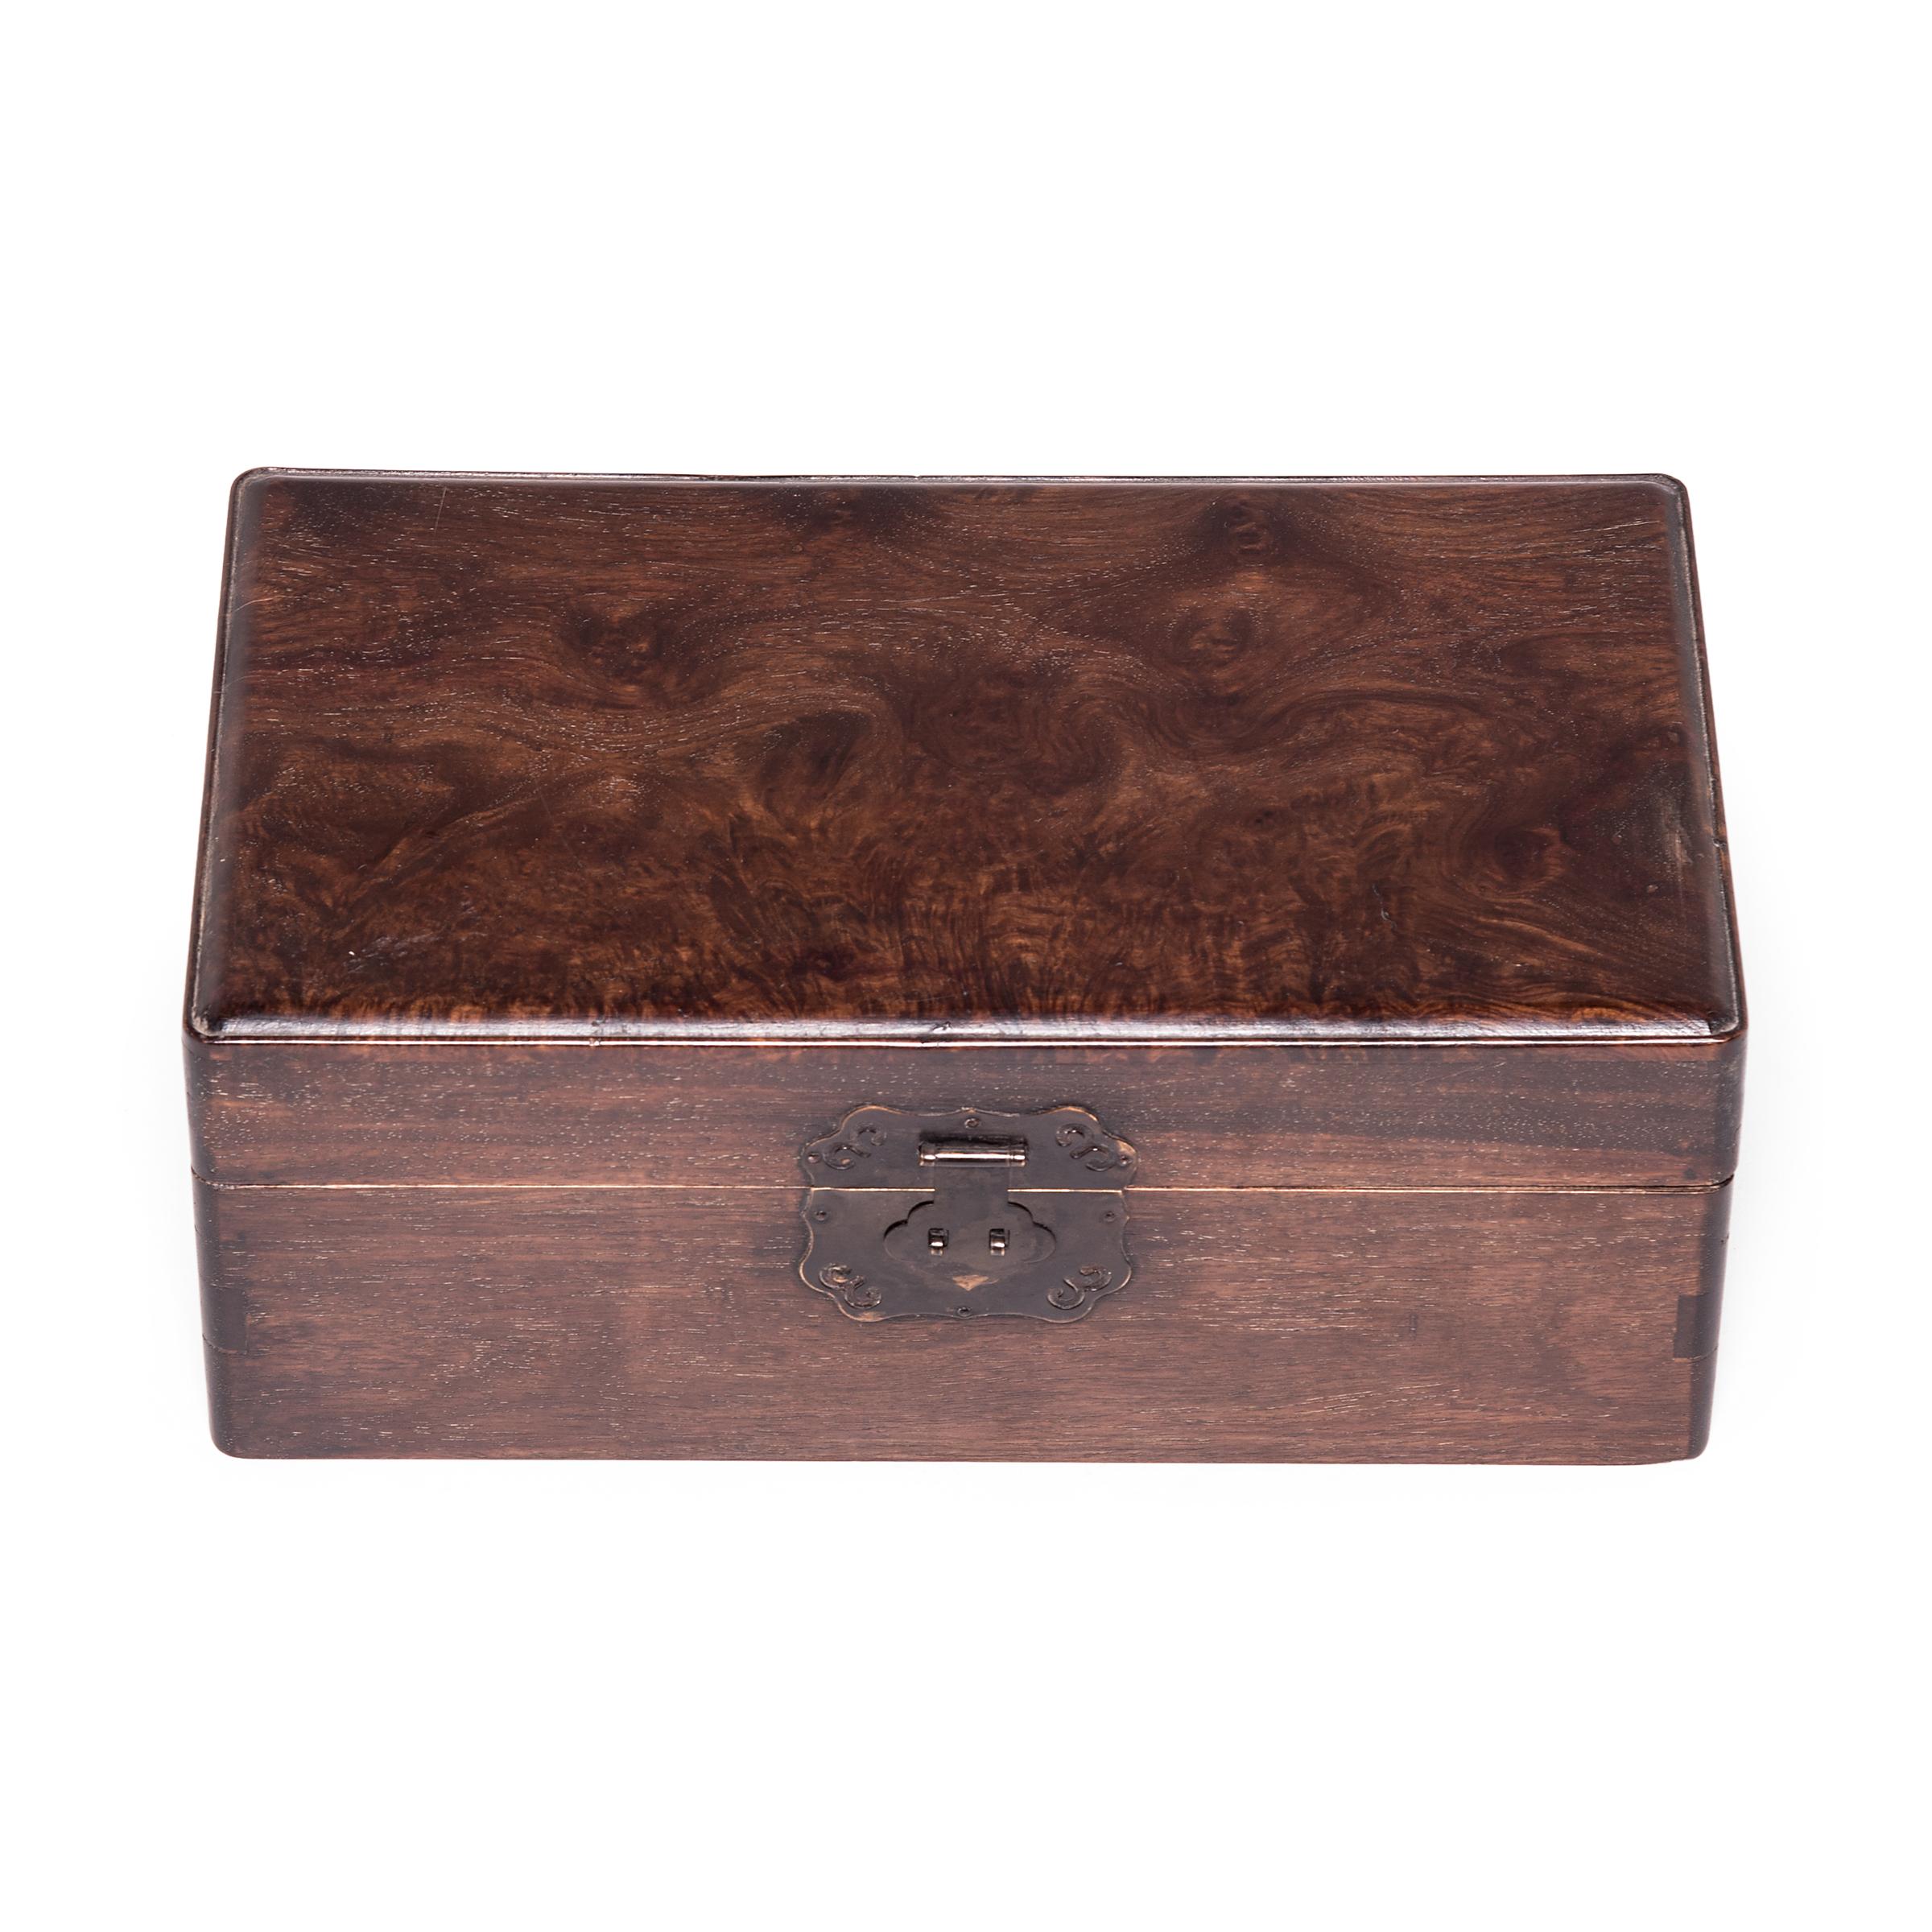 With clean lines and simple form, this refined 19th century lock box celebrates the beauty of huali wood, a rosewood valued highly for its abstract patterning and shimmering surface. The top surface of this box is made of huali burl wood, thought to